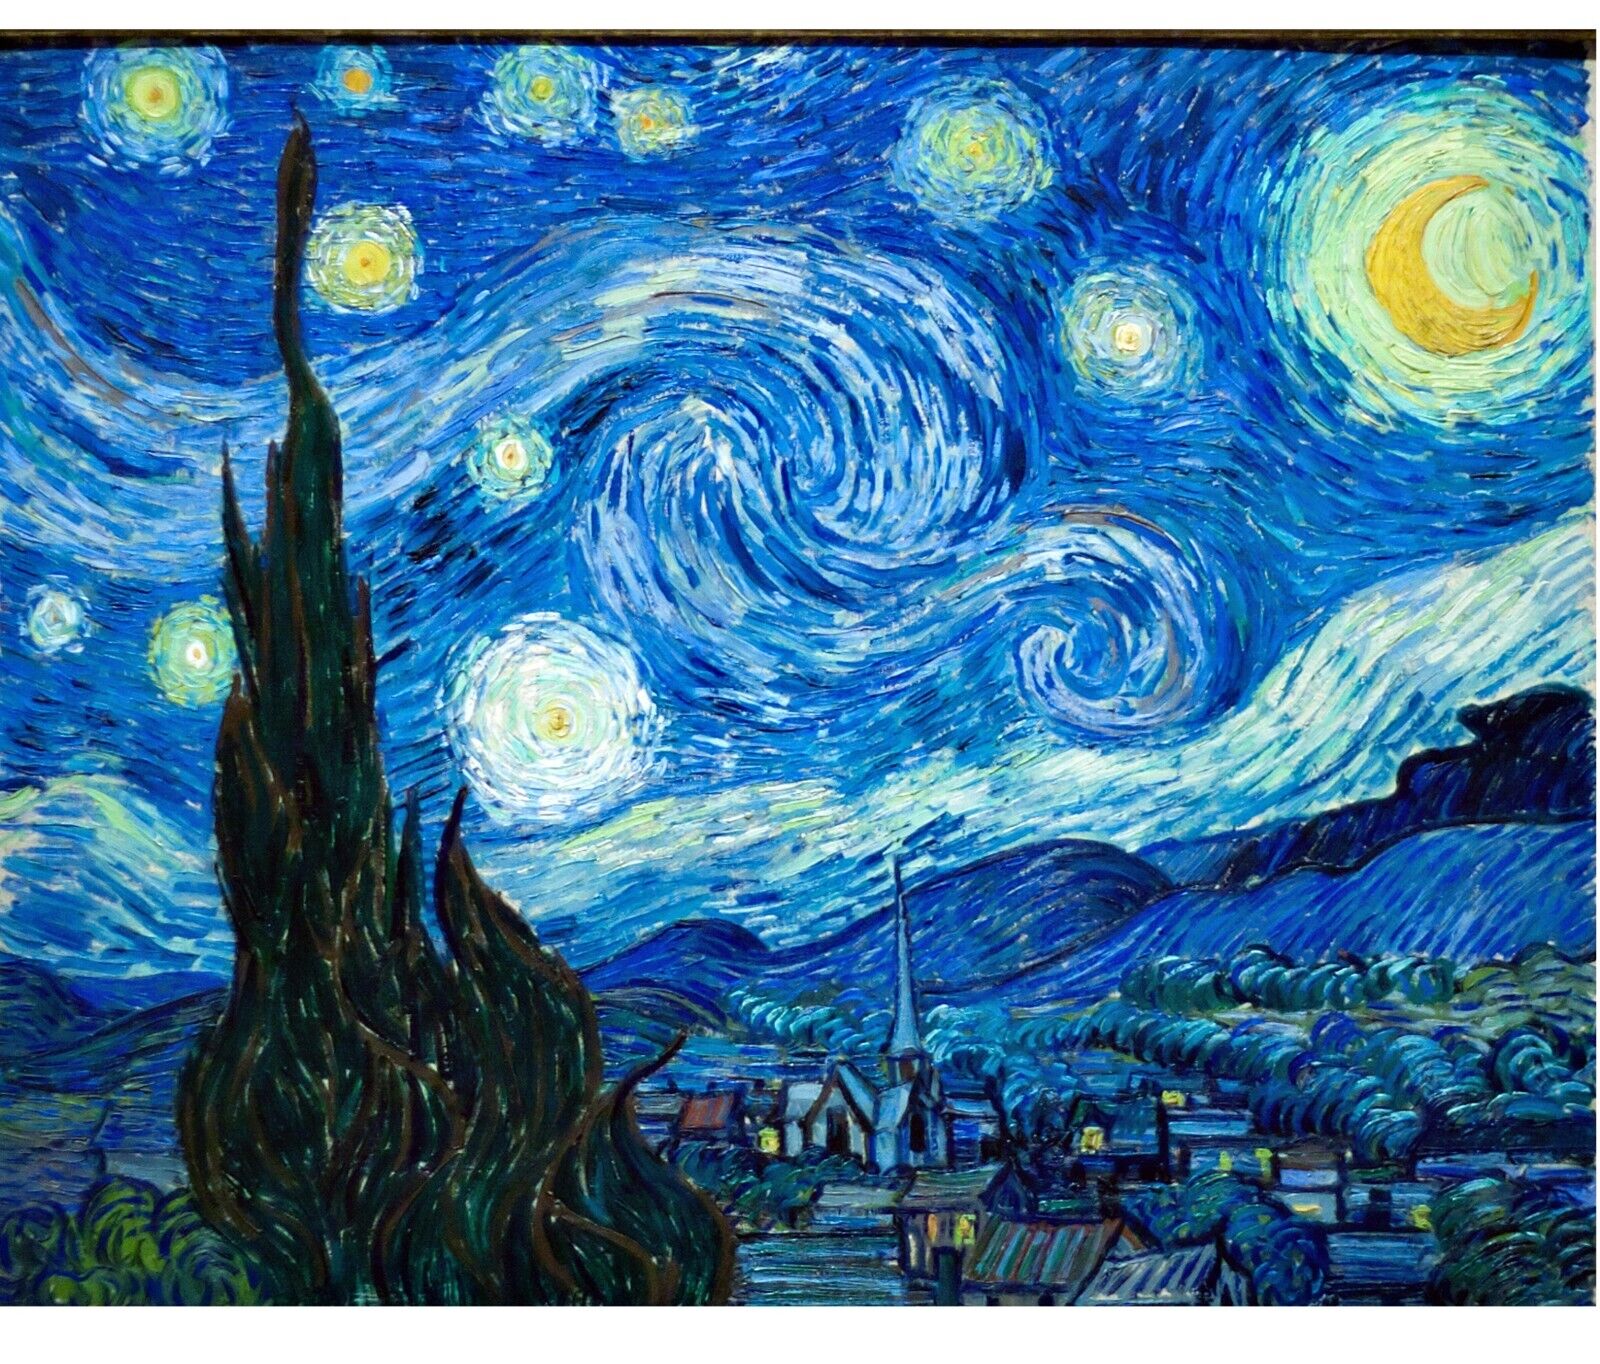 Van Gogh Starry nights  painting Mousepad Computer Mouse Pad  7 x 9